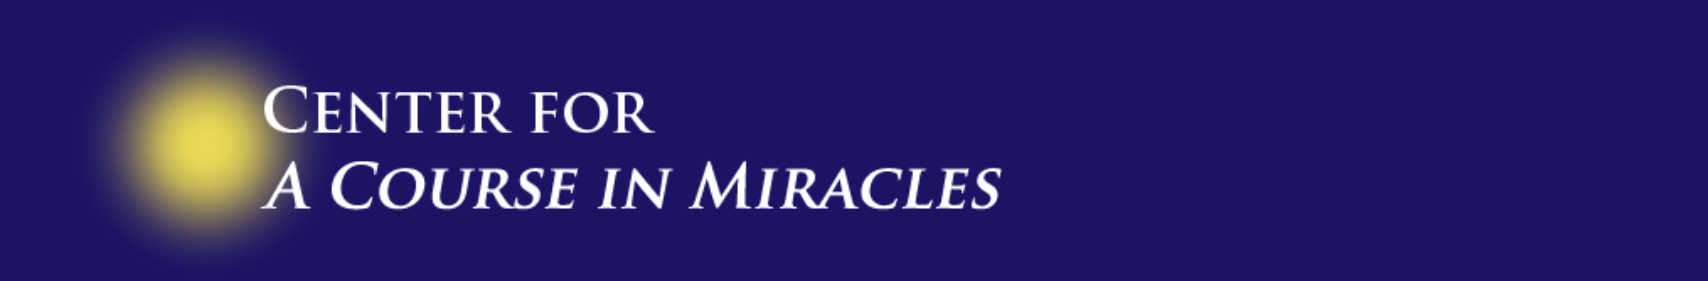 Center for A Course in Miracles